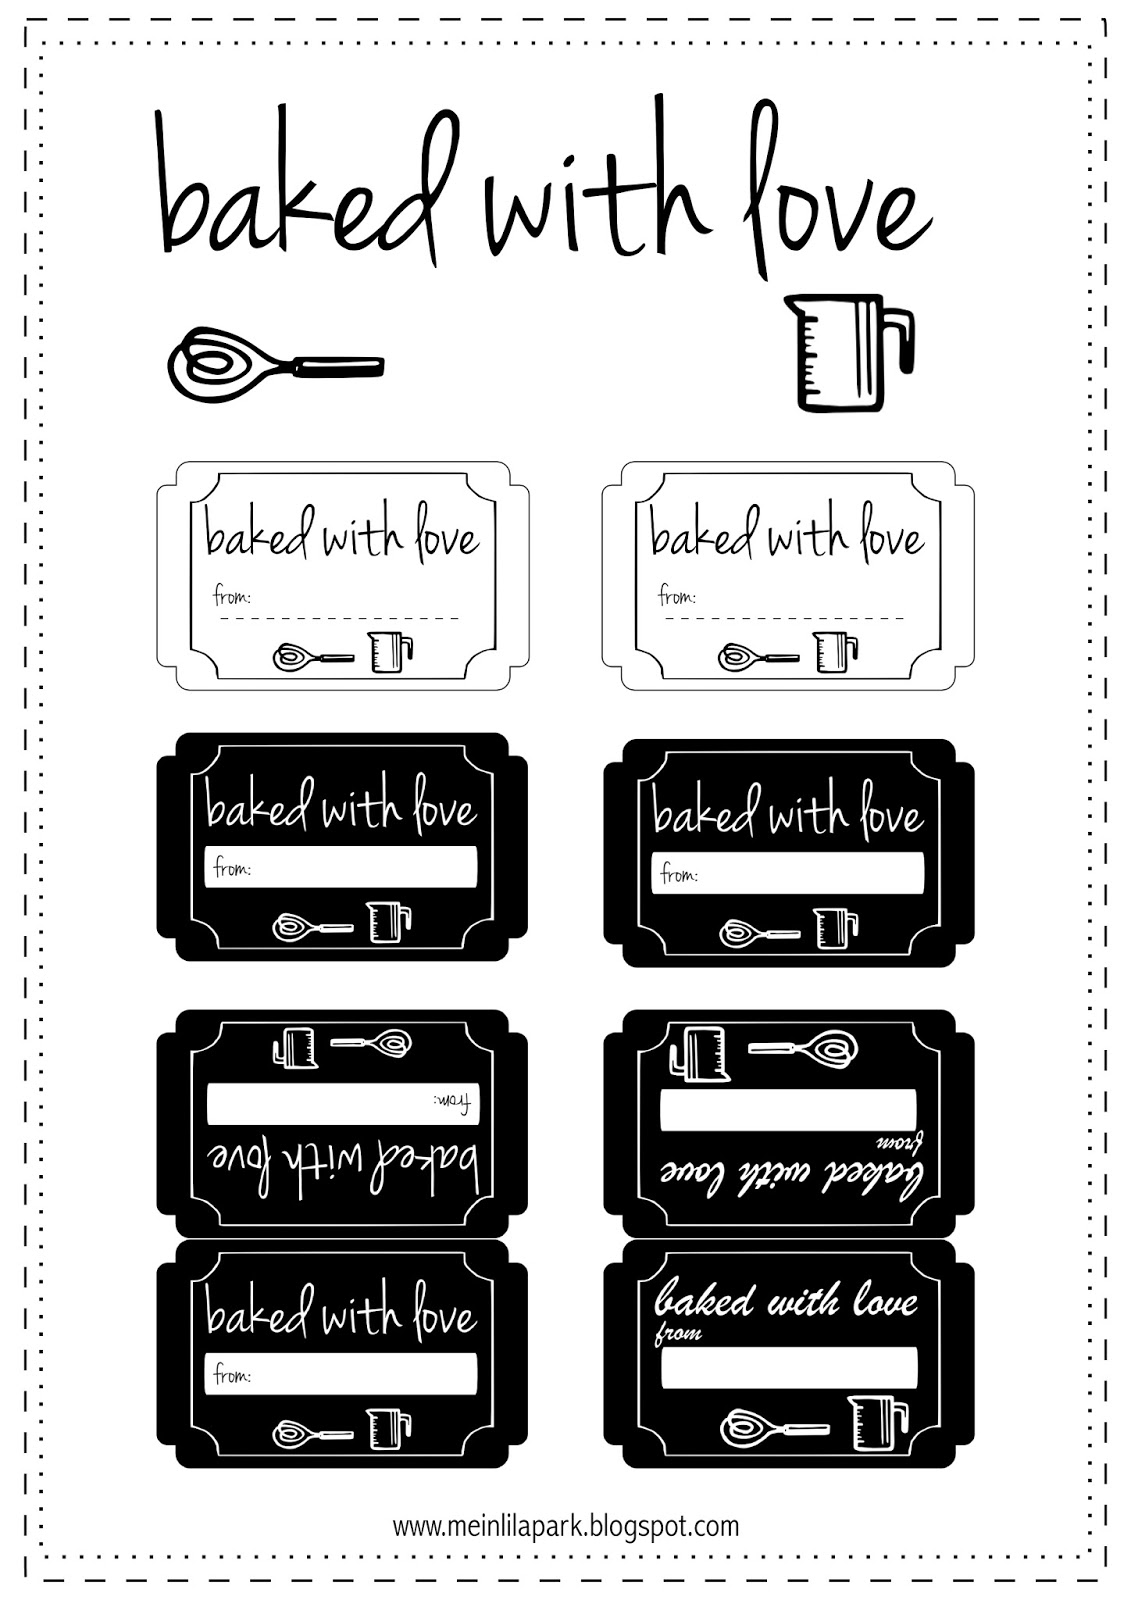 10 Free Printable Cookie Gift Tags Round up